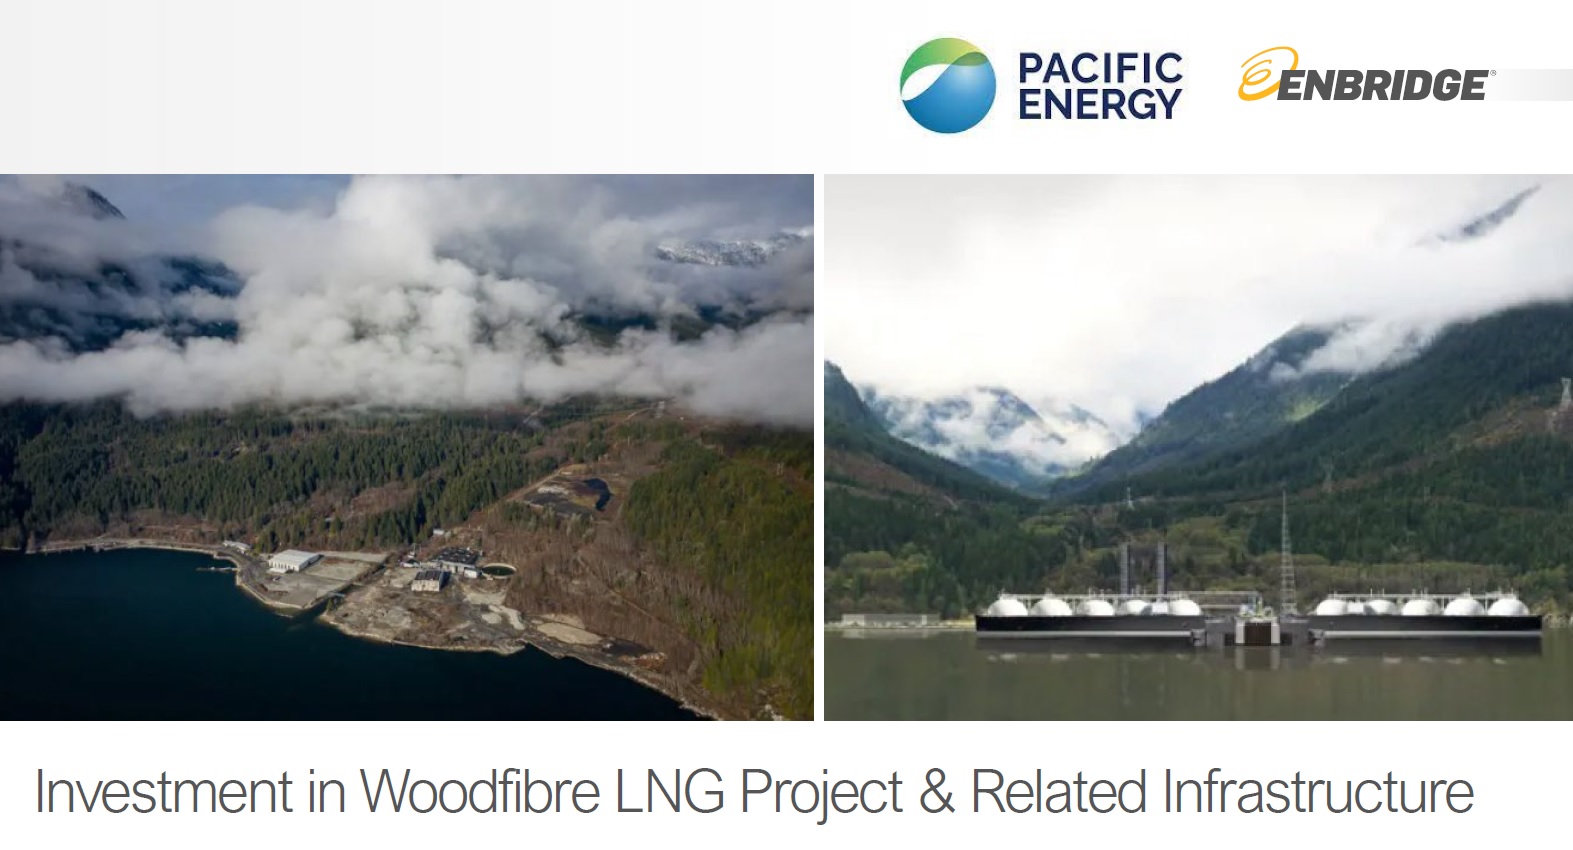 Two images of an LNG facility